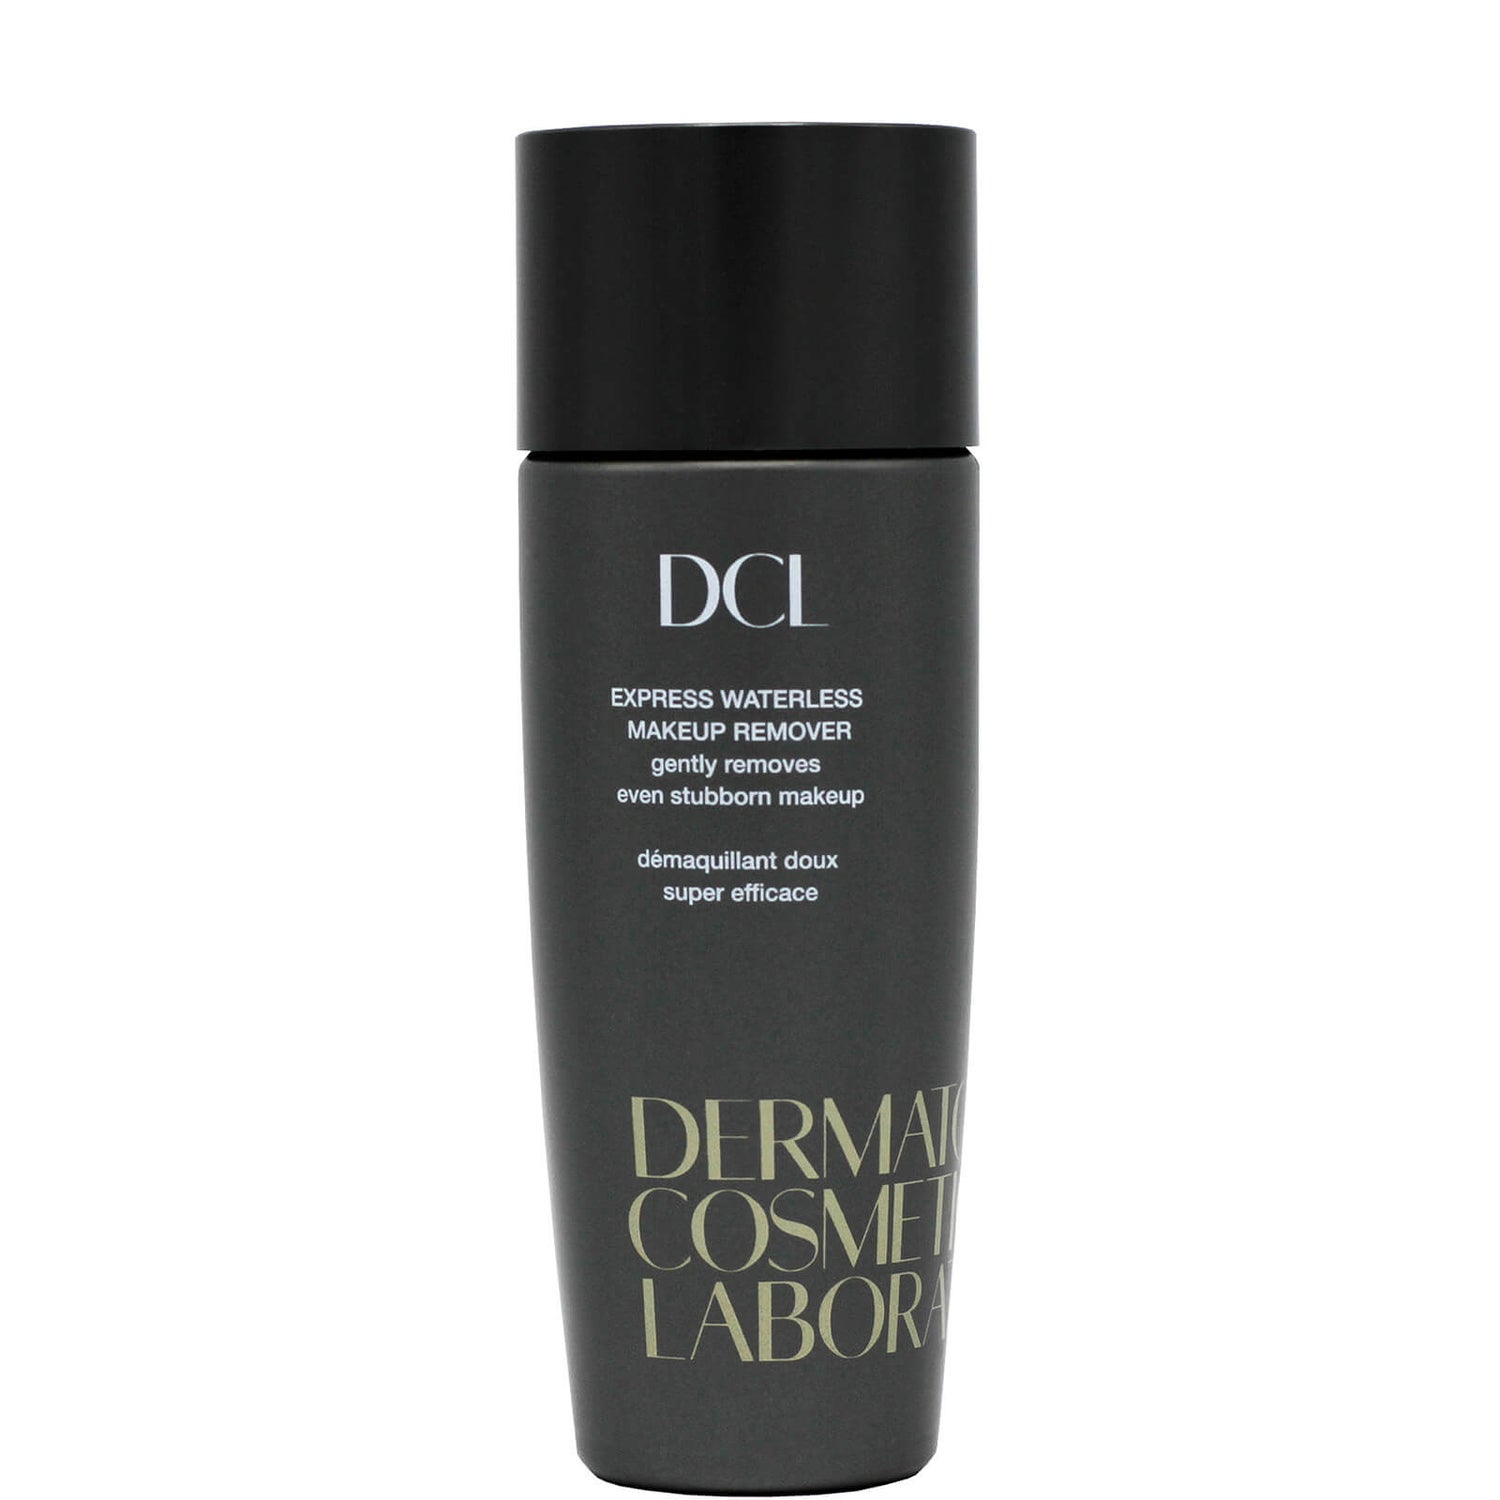 DCL Dermatologic Cosmetic Laboratories Express Waterless Makeup Remover (5.1 fl. oz.)